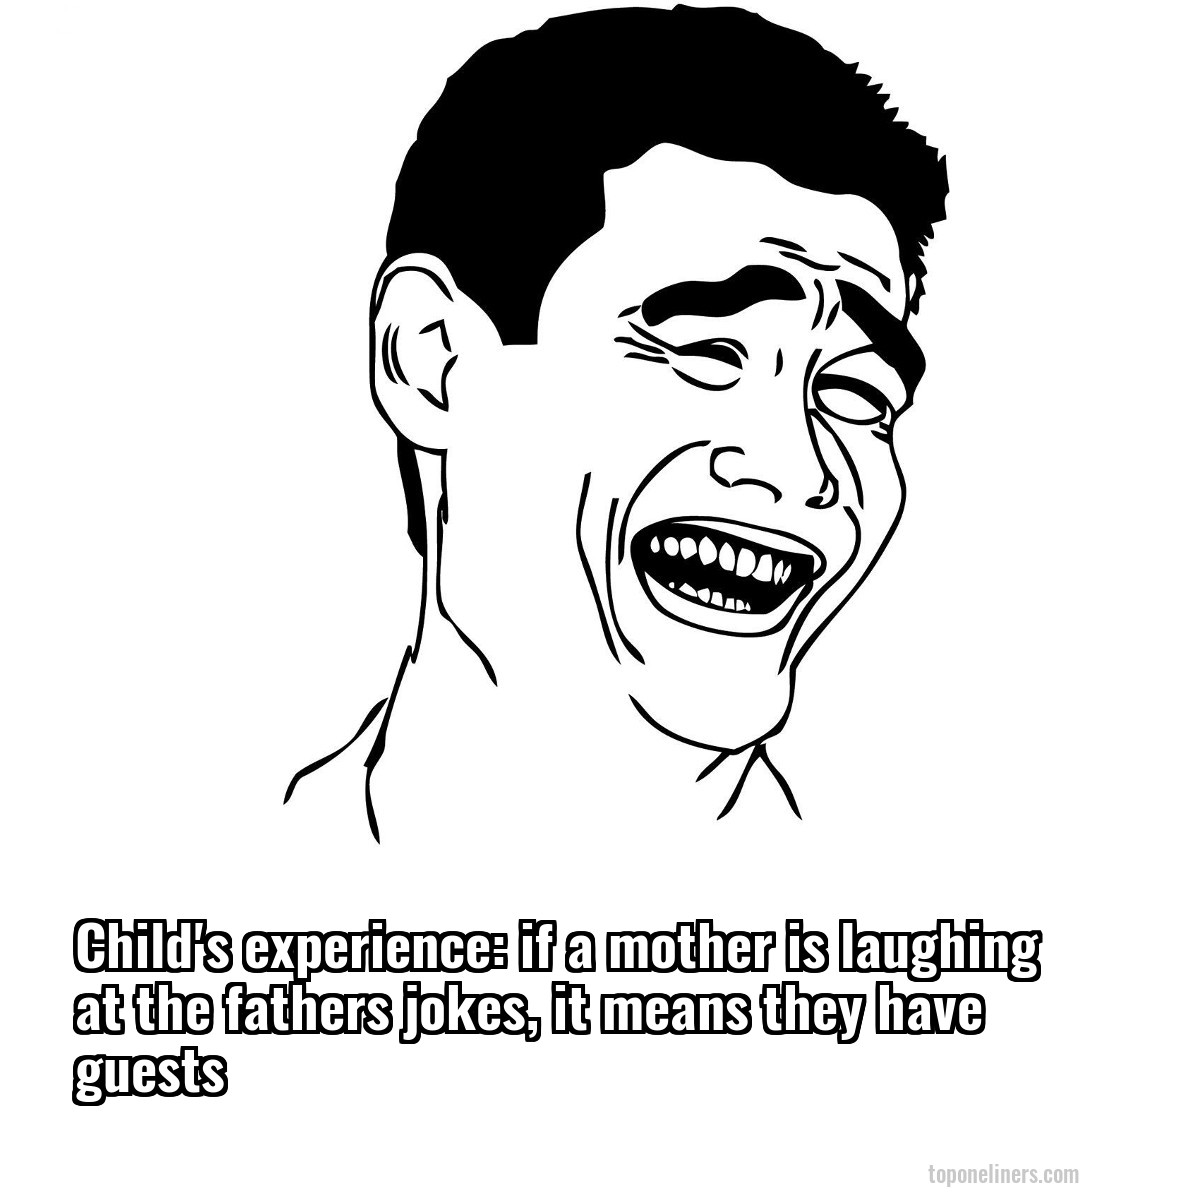 Child's experience: if a mother is laughing at the fathers jokes, it means they have guests
